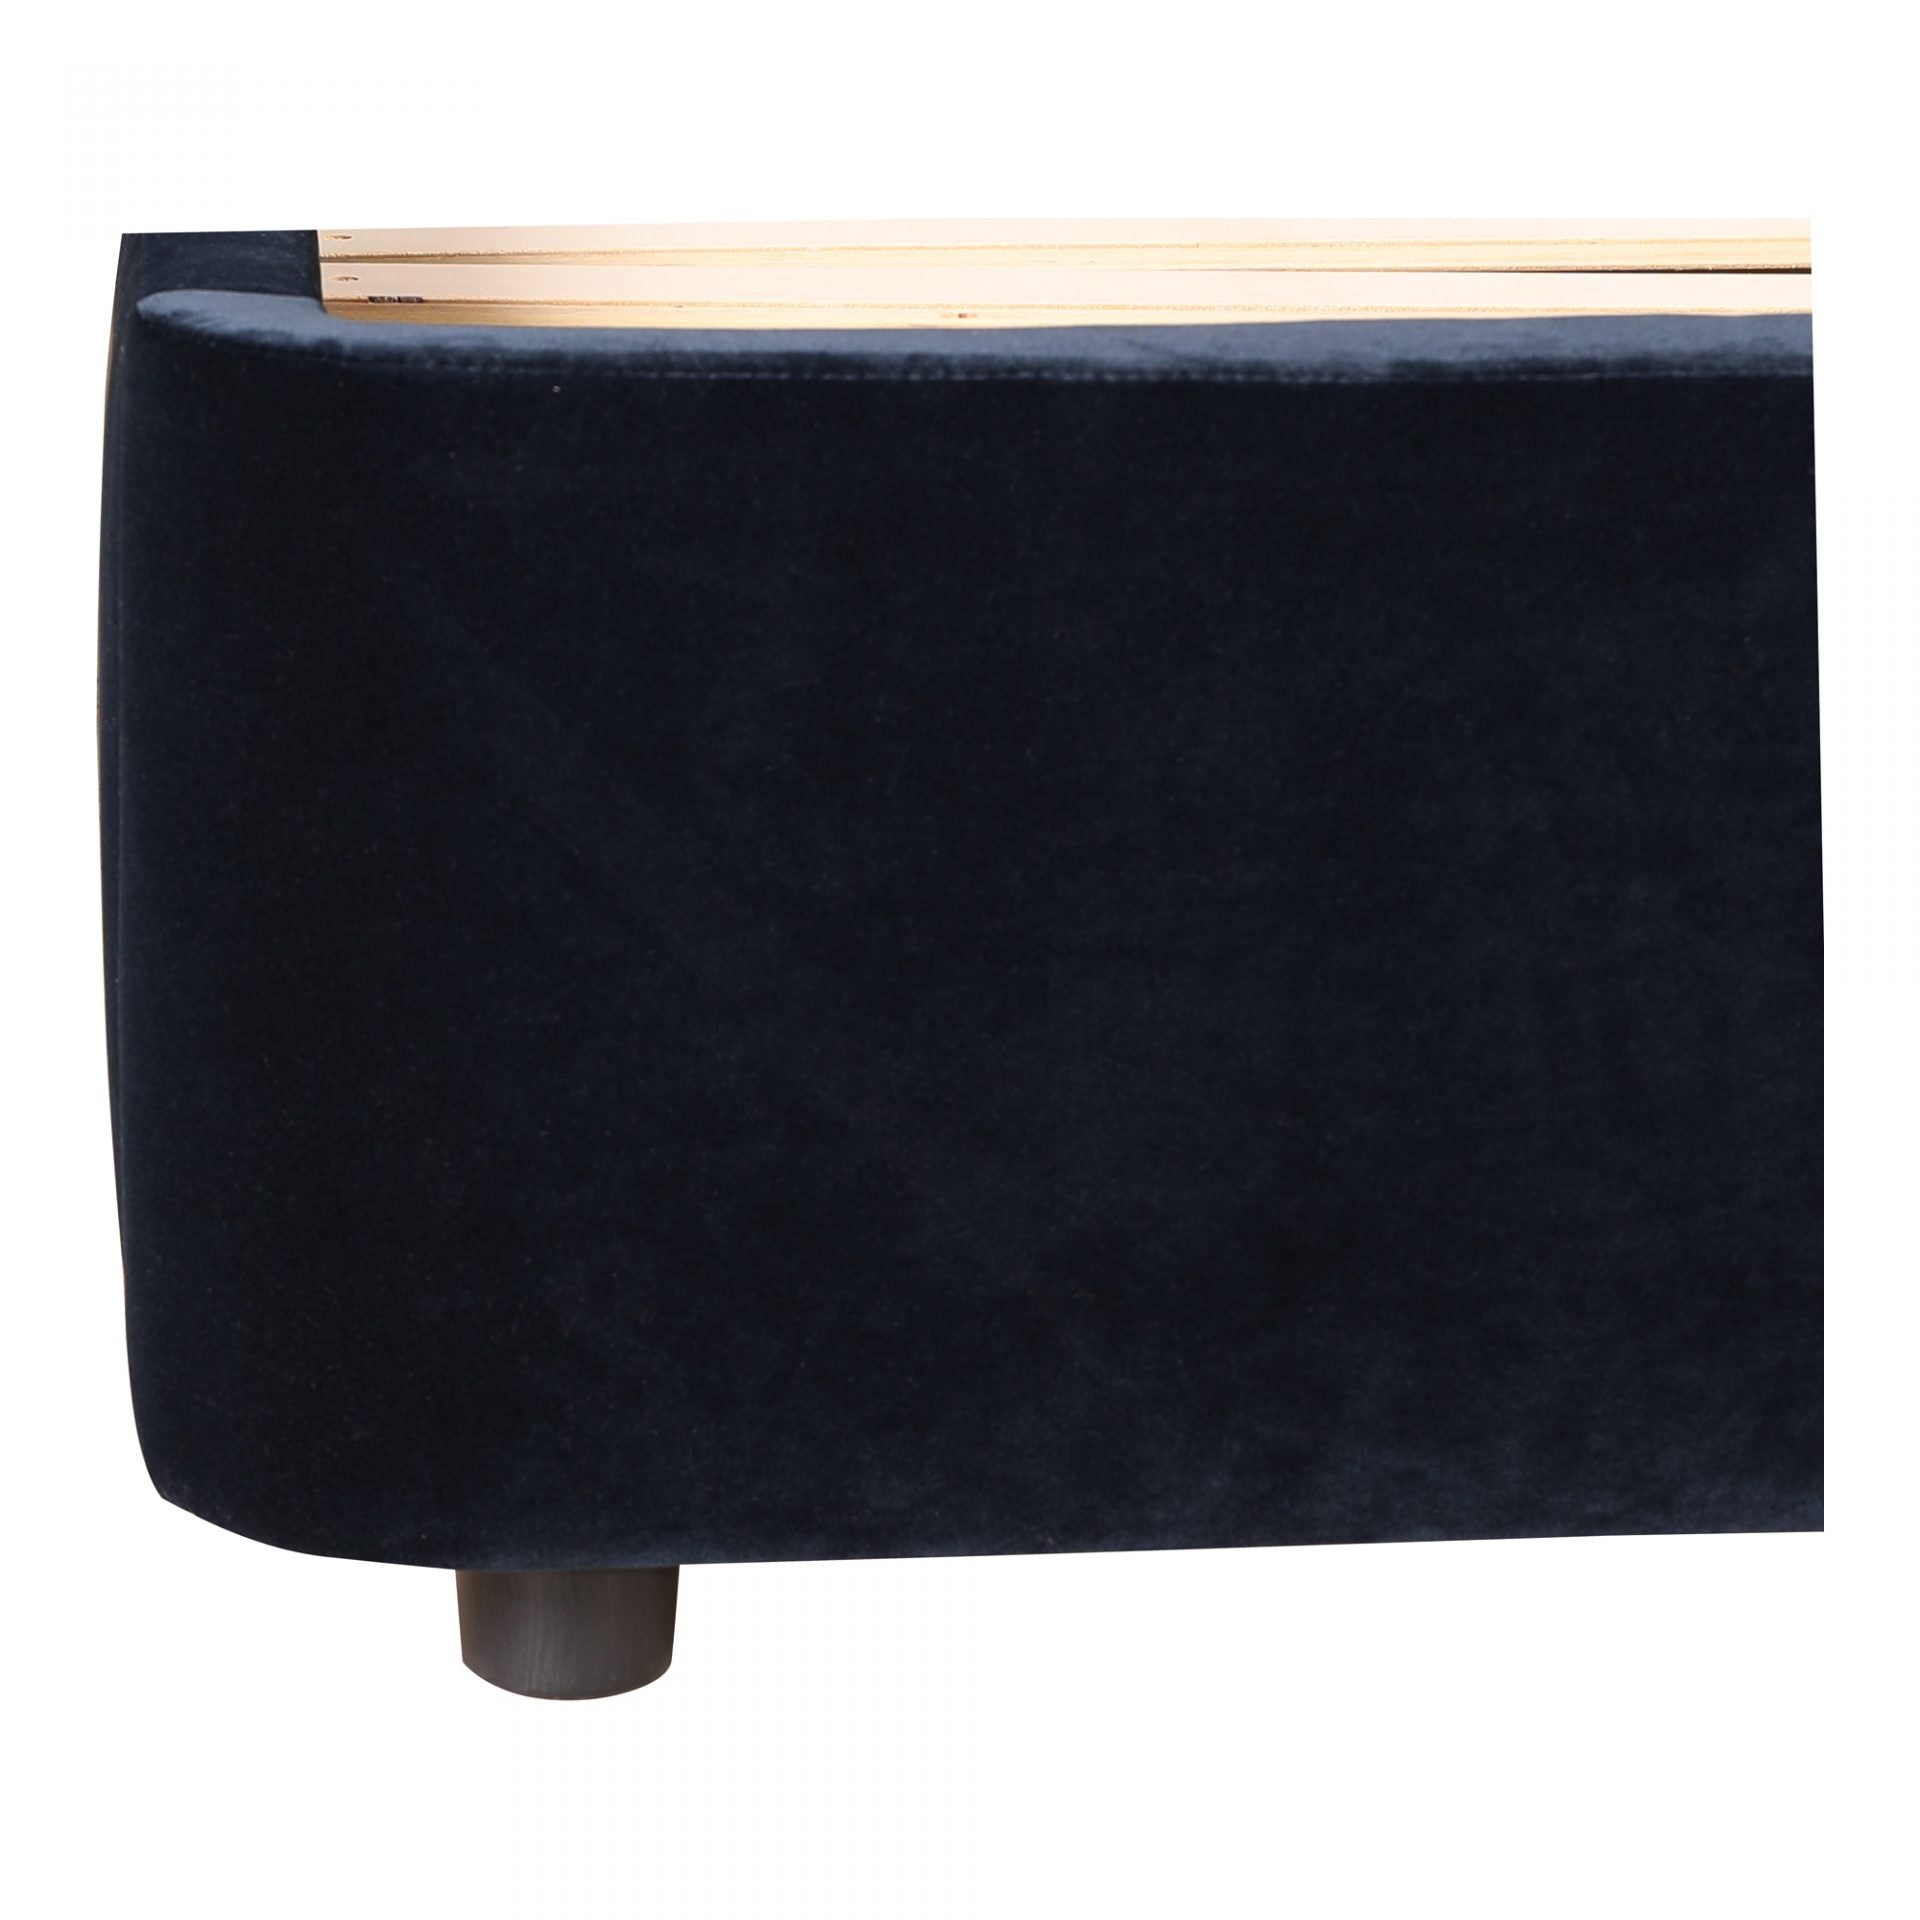 This Samara Blue Velvet Bed is a velvety dream. Made from solid pine and filed with foam for a plush look, this will elevate your bedroom and have you feeling like royalty.   King Dimensions: 90.5"W x 88"D x 43"H Queen Dimensions: 75"W x 88"D x 43"H  Materials: Upholstery - 100% Velvet Polyester, Solid Pine Frame